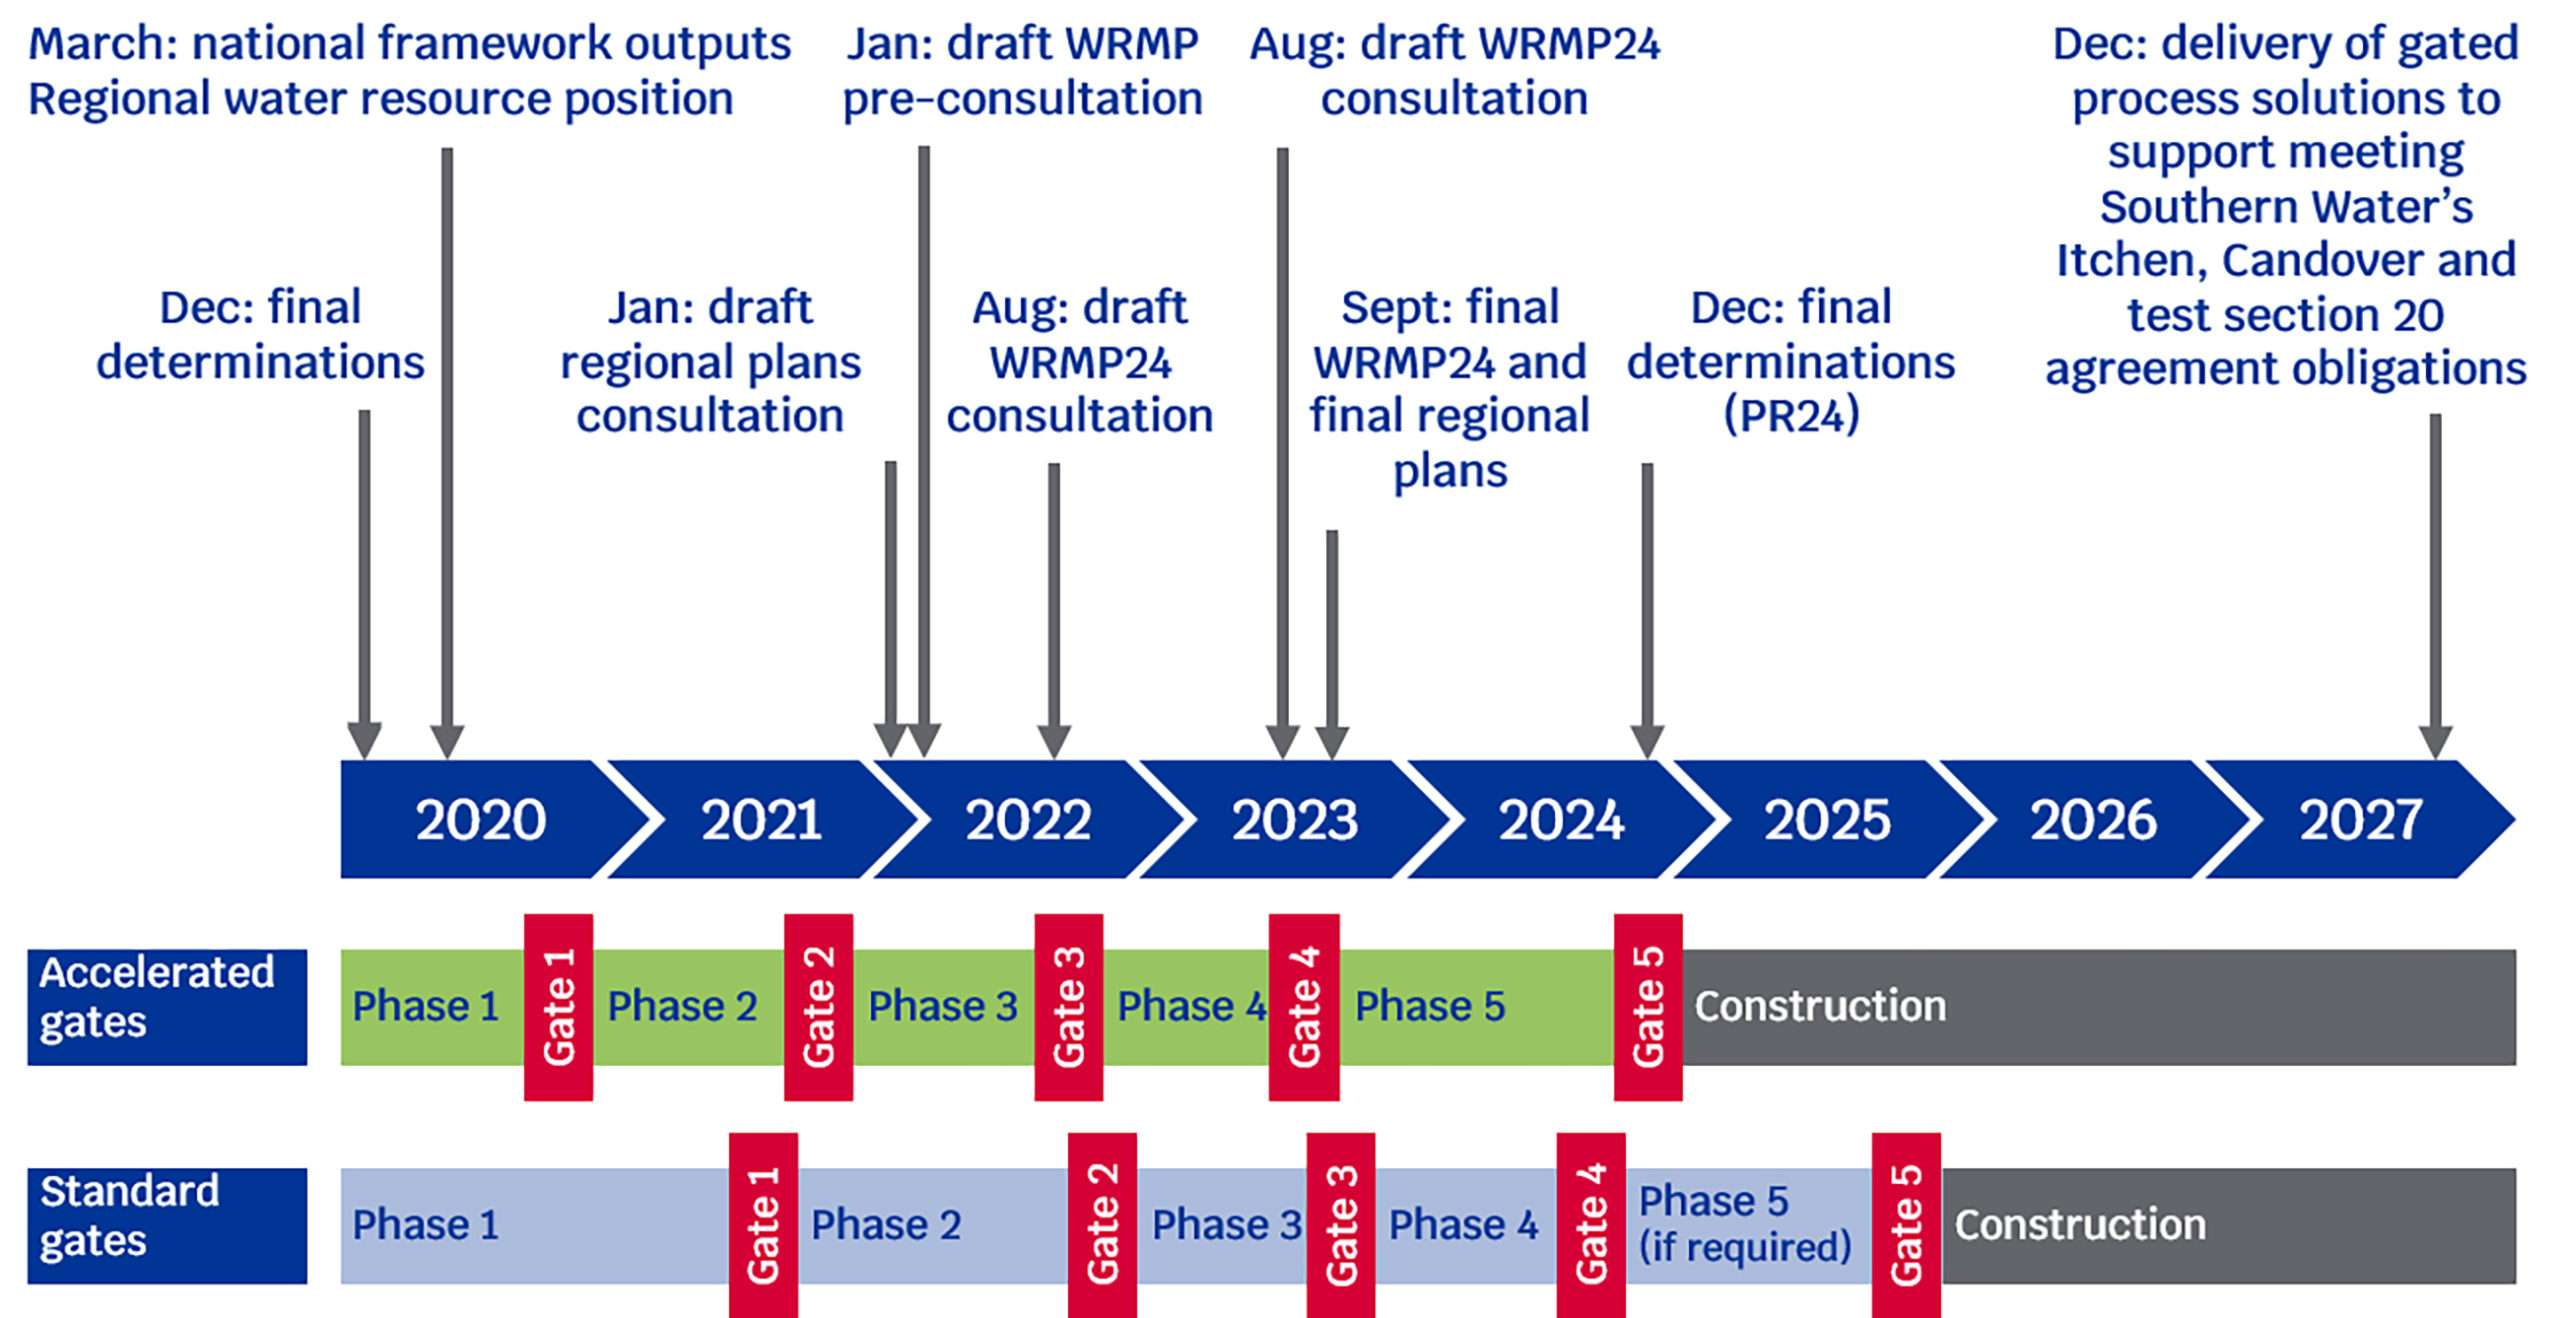 The RAPID gated process timeline